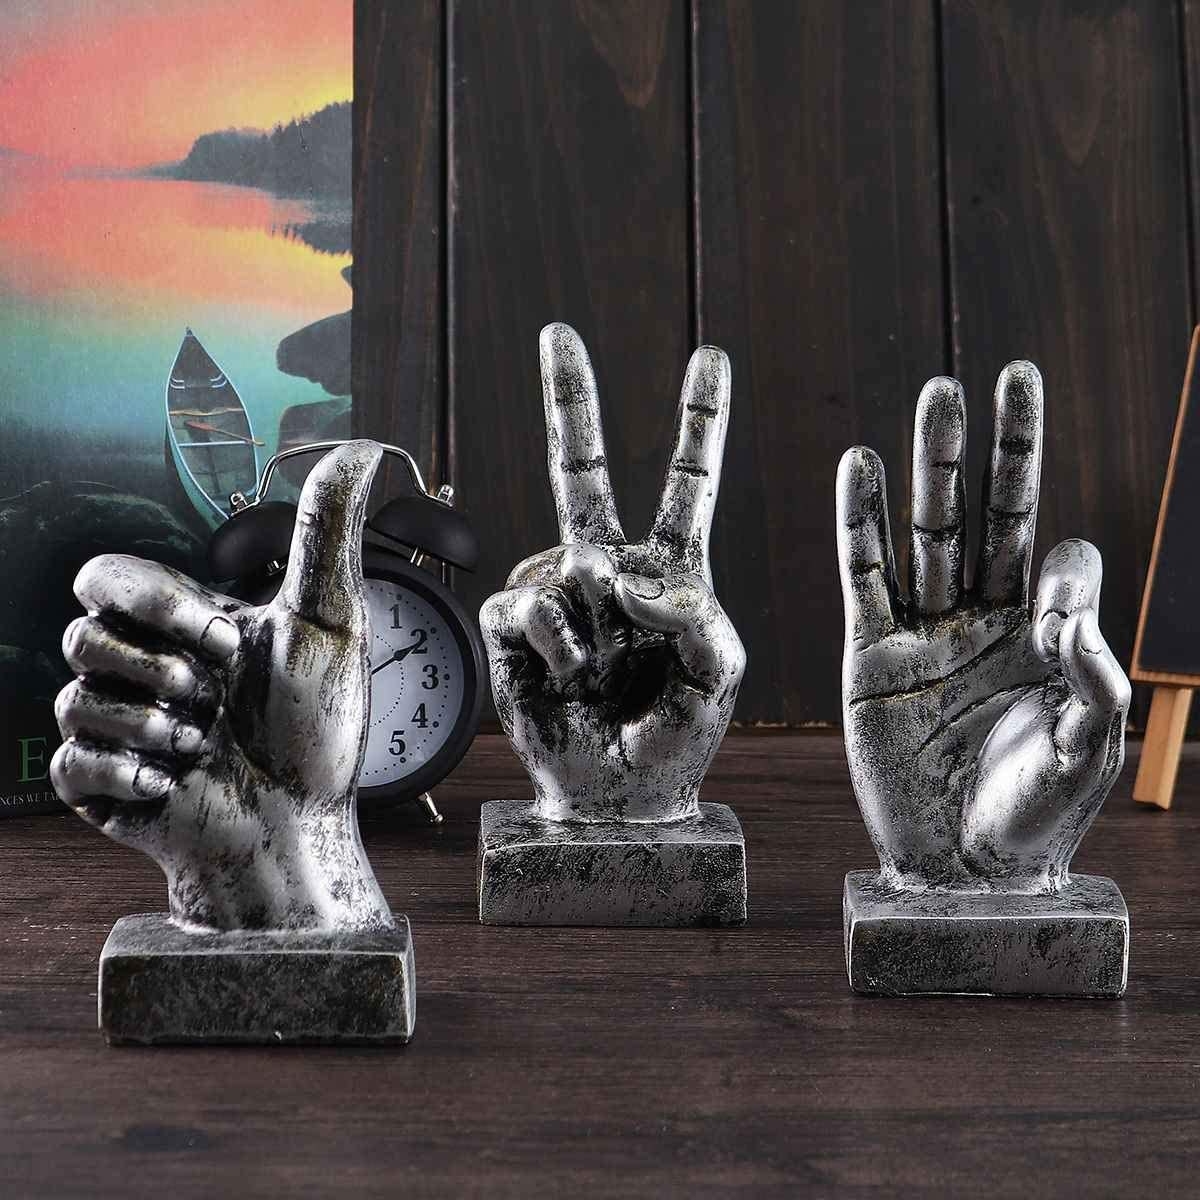 three silver gesture sculptures on a wooden surface